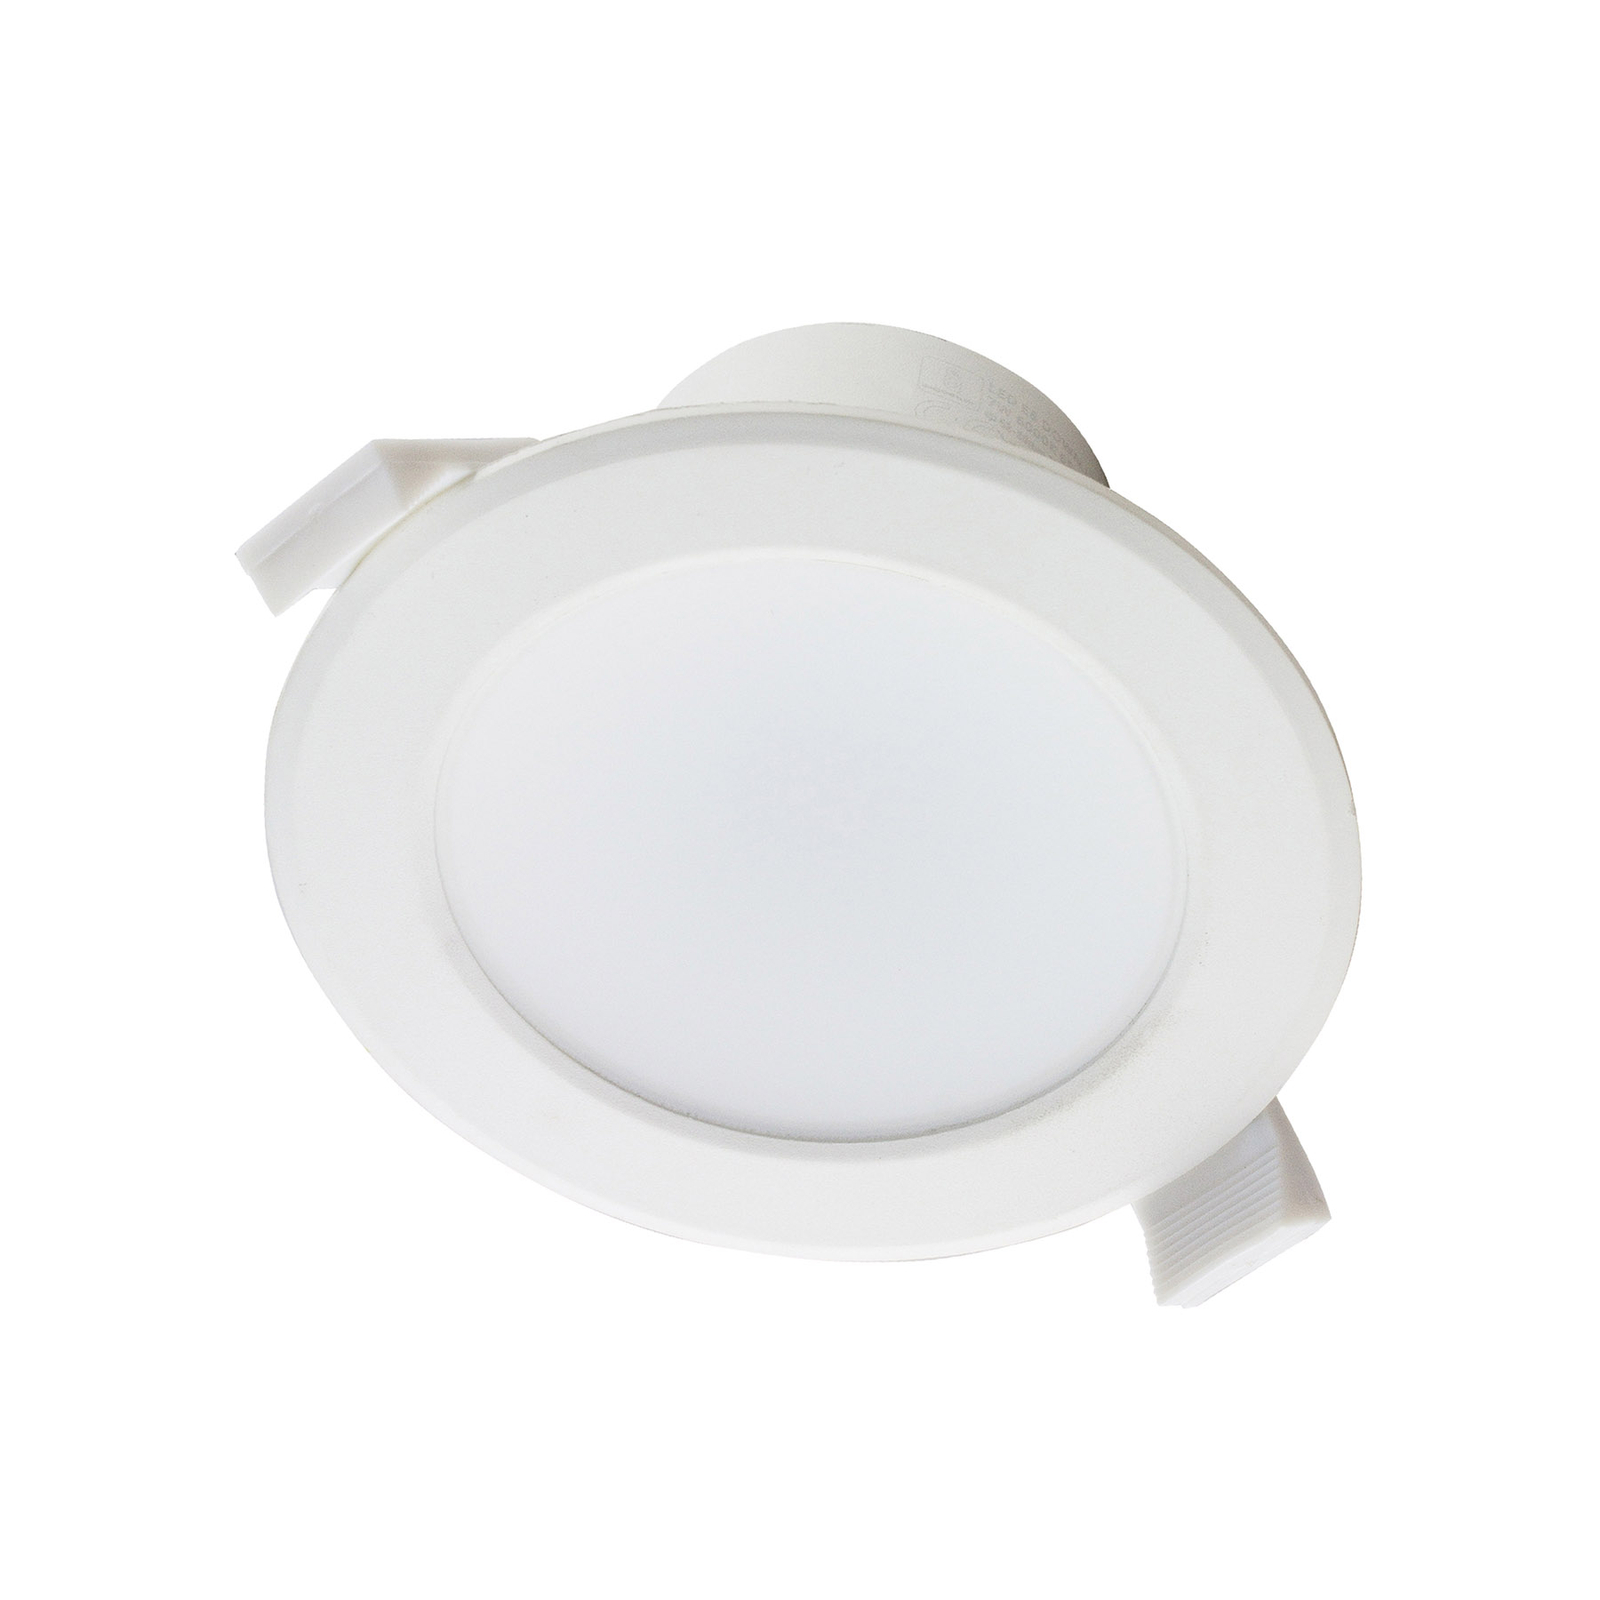 Prios LED recessed light Rida, 19cm, 18W, 10pcs, CCT, dimmable